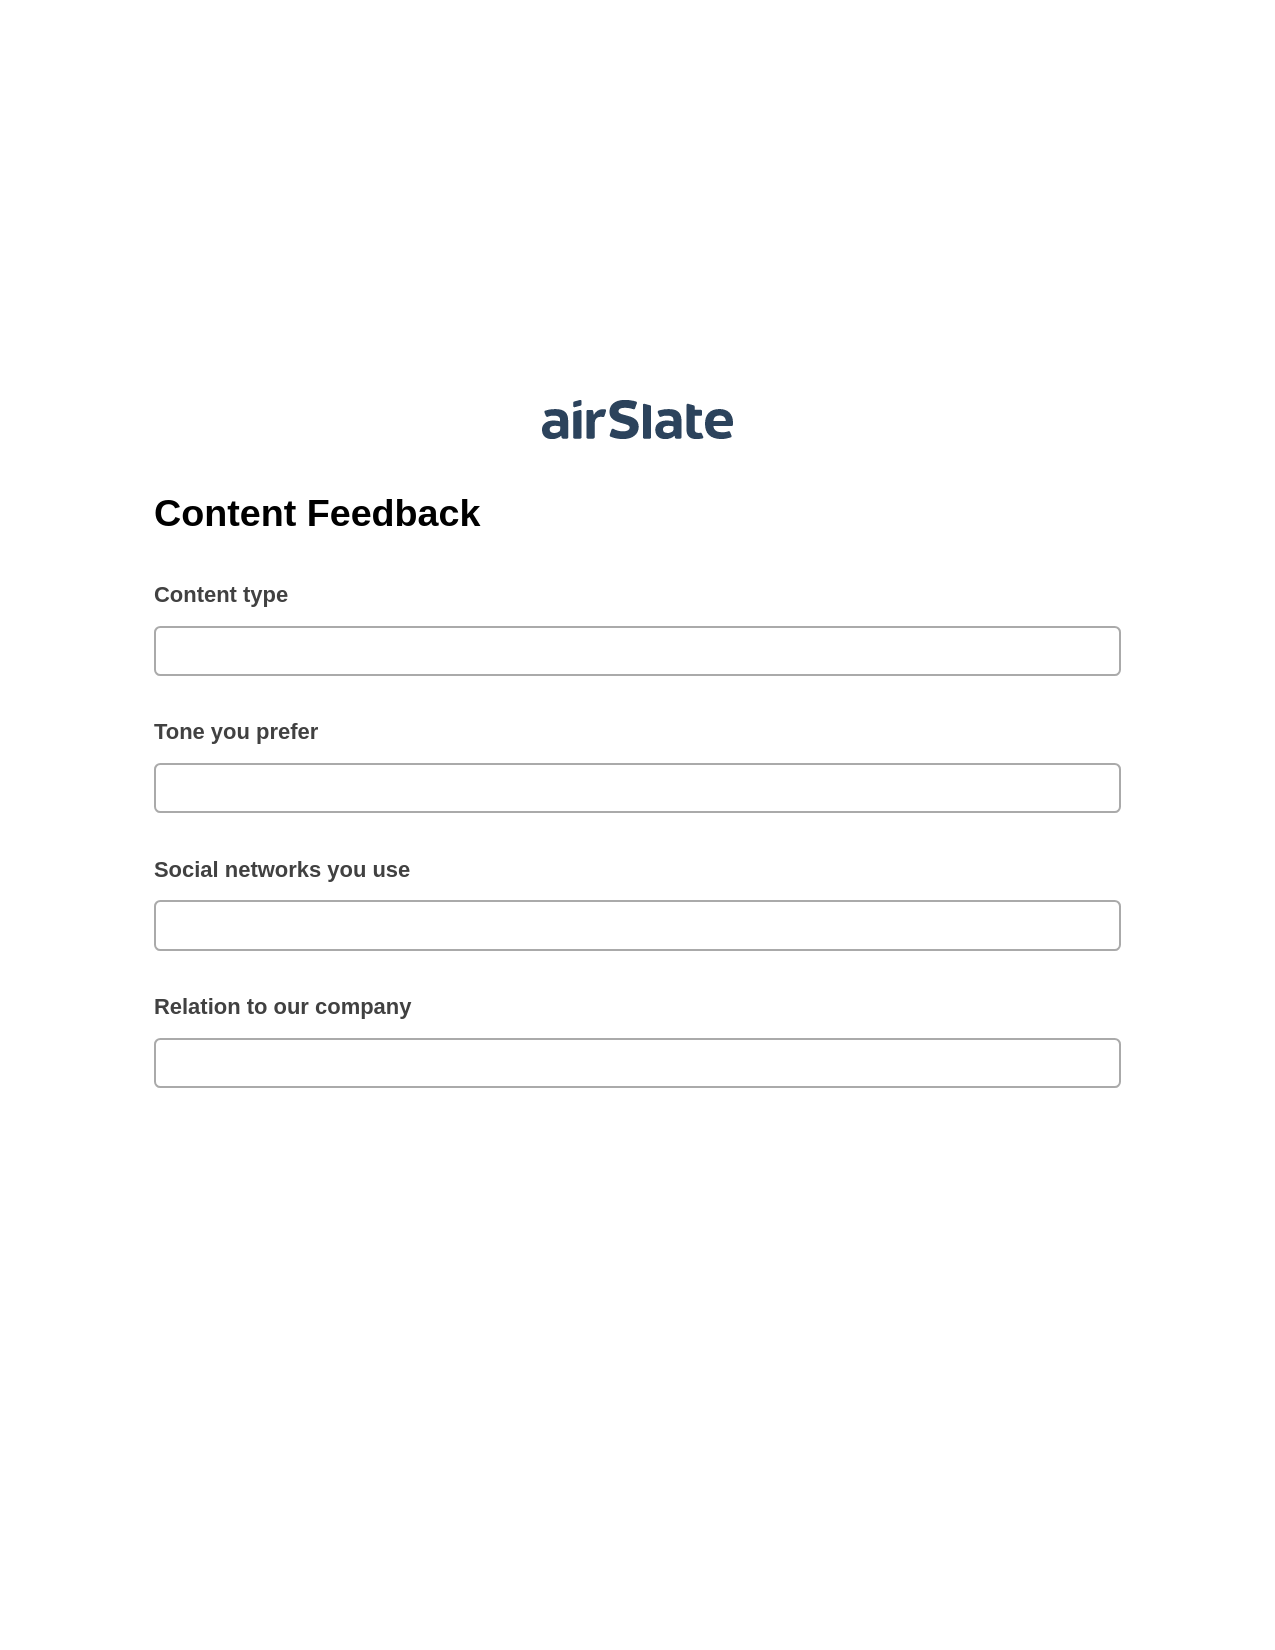 Content Feedback Pre-fill from Salesforce Record Bot, Unassign Role Bot, Slack Two-Way Binding Bot